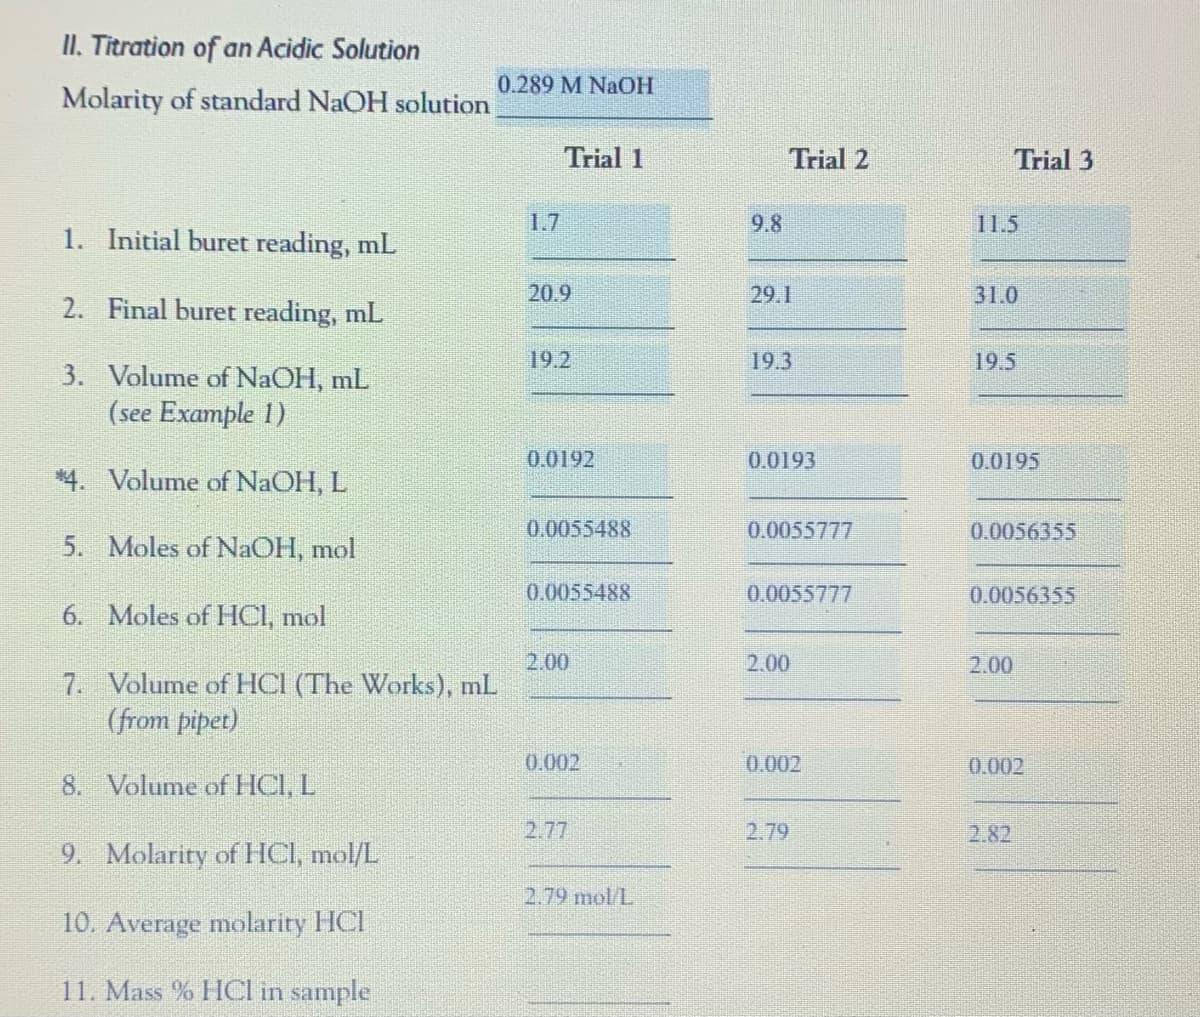 II. Titration of an Acidic Solution
0.289 M NaOH
Molarity of standard NaOH solution
Trial 1
Trial 2
Trial 3
1.7
9.8
11.5
1. Initial buret reading, mL
20.9
29.1
31.0
2. Final buret reading, mL
19.2
19.3
19.5
3. Volume of NaOH, mL
(see Example 1)
0.0192
0.0193
0.0195
*4. Volume of NaOH, L
0.0055488
0.0055777
0.0056355
5. Moles of NAOH, mol
0.0055488
0.0055777
0.0056355
6. Moles of HCI, mol
2.00
2.00
2.00
7. Volume of HCI (The Works), mL
(from pipet)
0.002
0.002
0.002
8. Volume of HCI, L
2.77
2.79
2.82
9. Molarity of HCI, mol/L
2.79 mol/L
10. Average molarity HCI
11. Mass % HCI in sample
